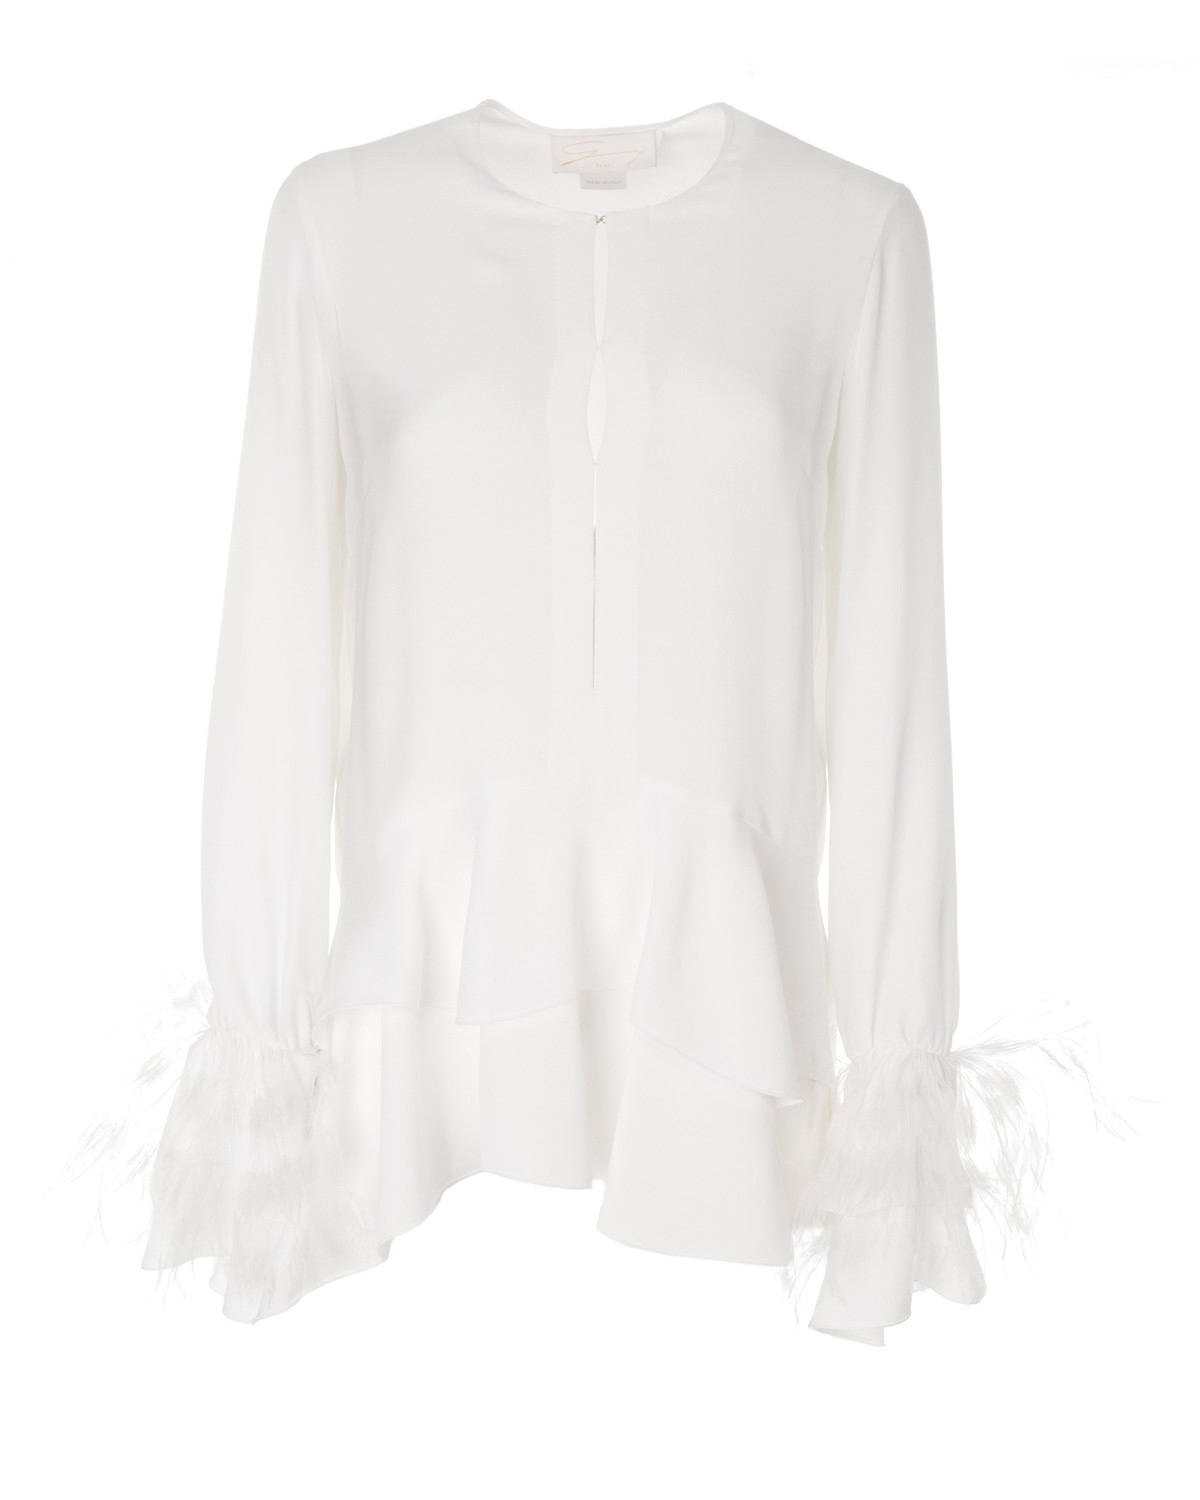 Crêpe de chine blouse with ruffle and feathers